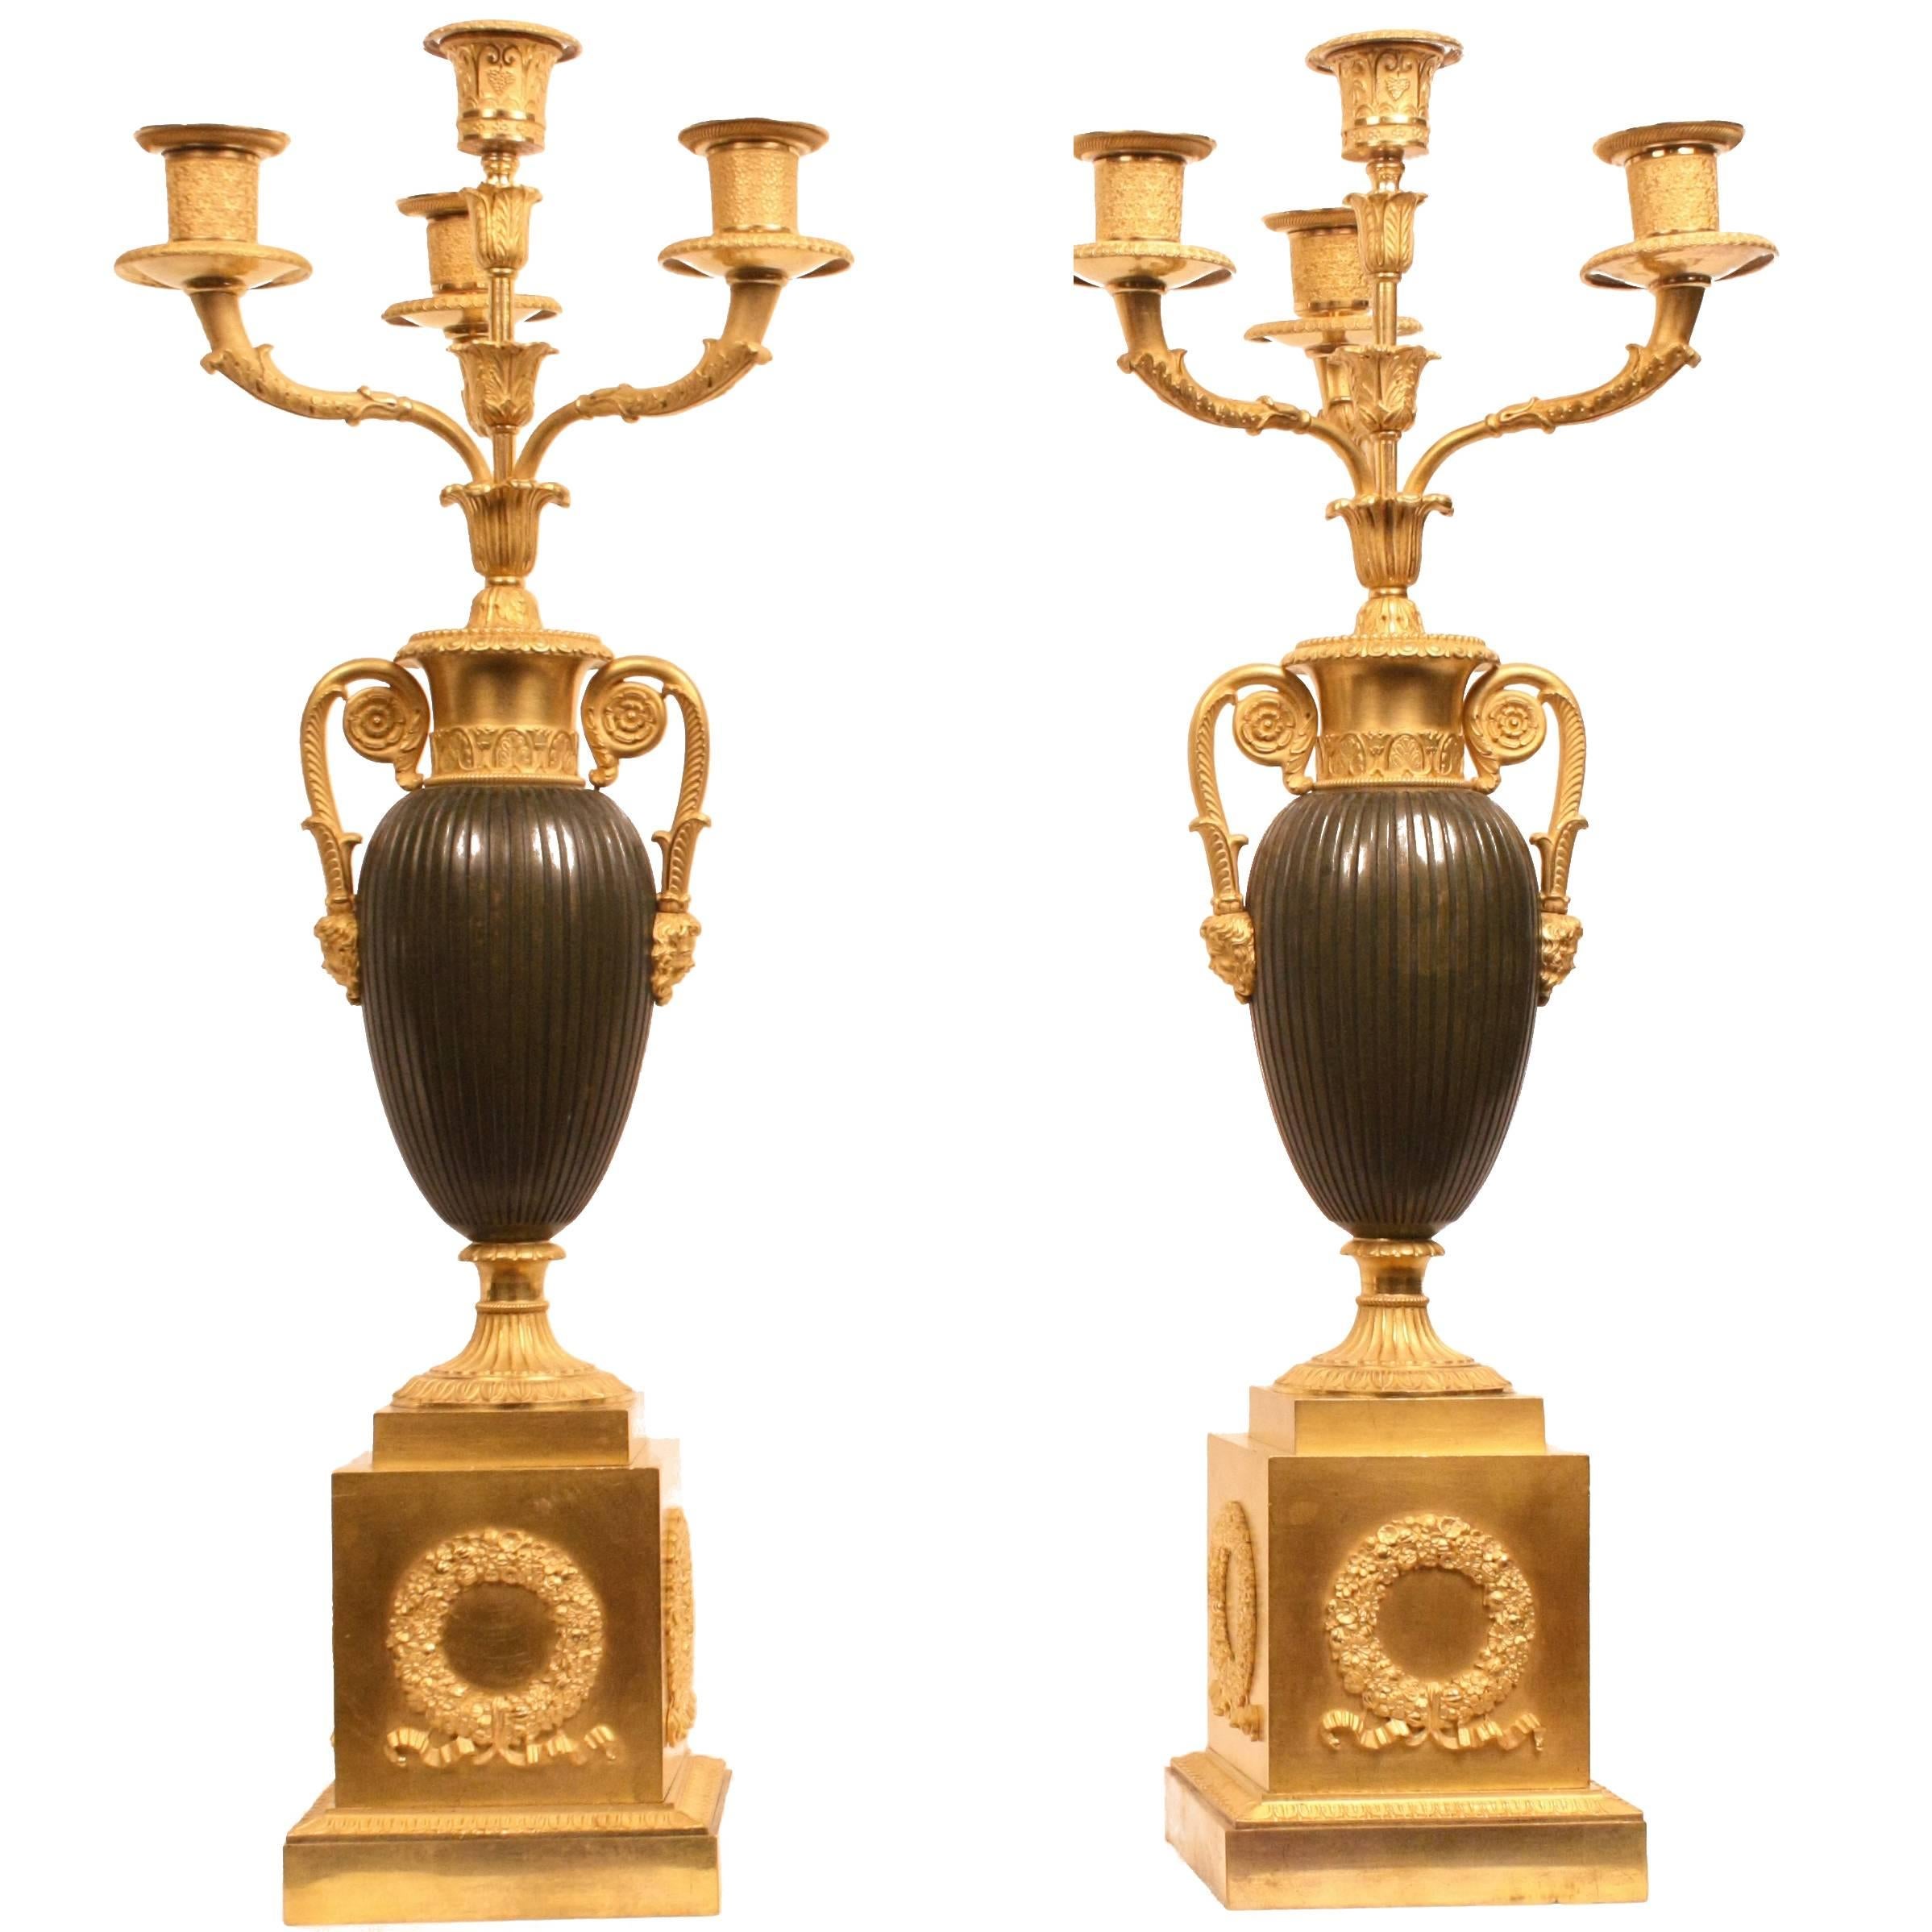 Pair of French Early 19th Century Gilt Bronze Candelabra For Sale